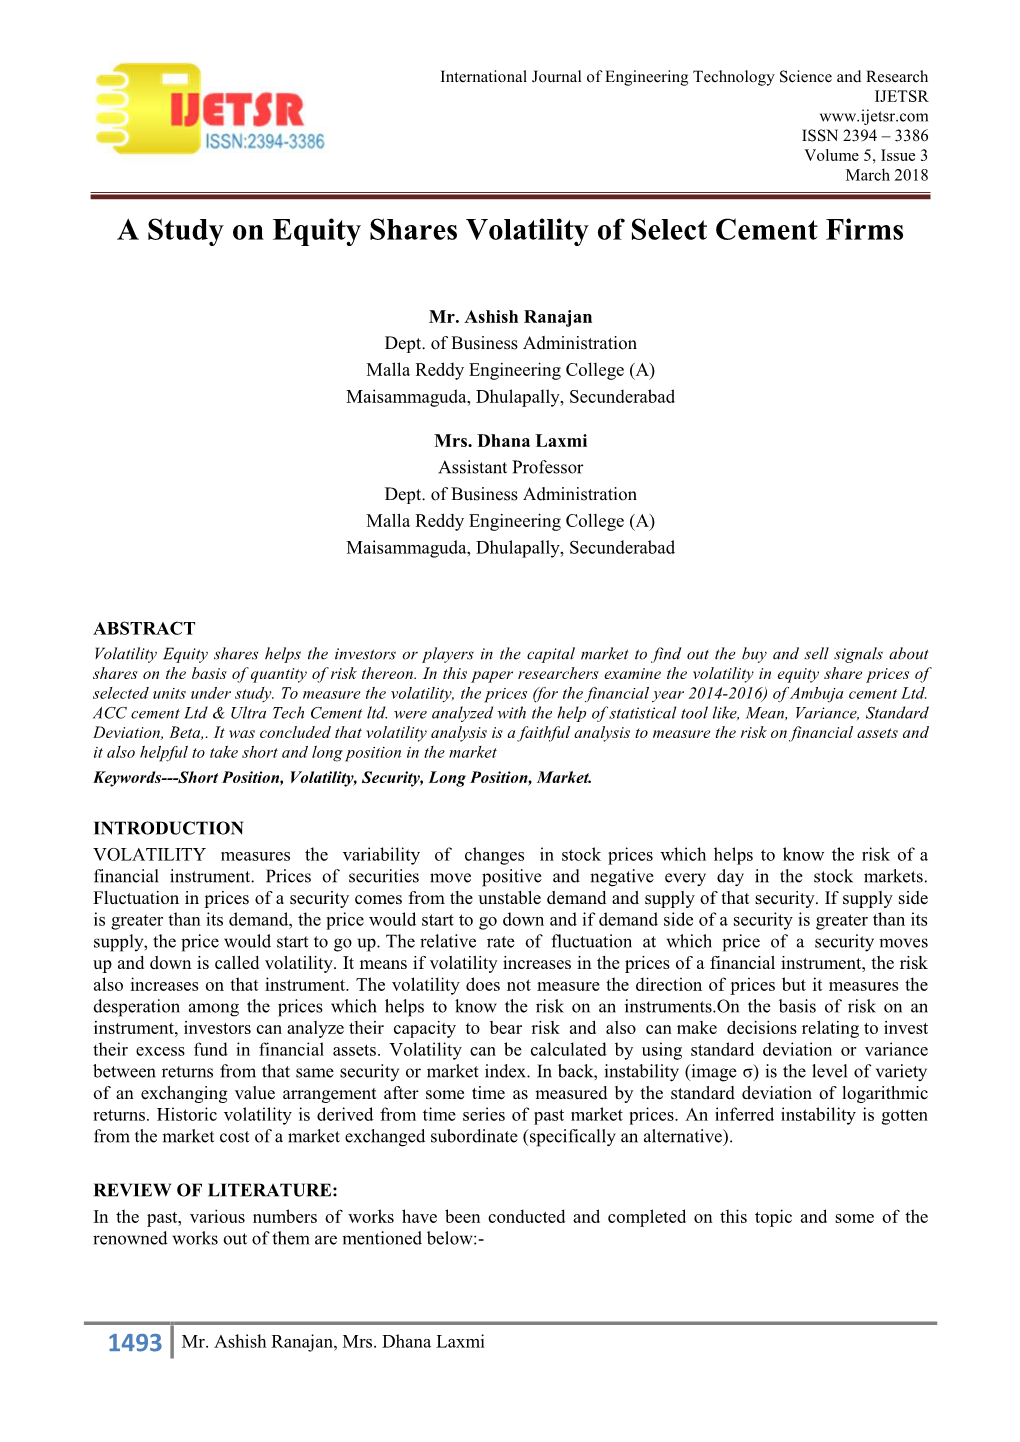 A Study on Equity Shares Volatility of Select Cement Firms